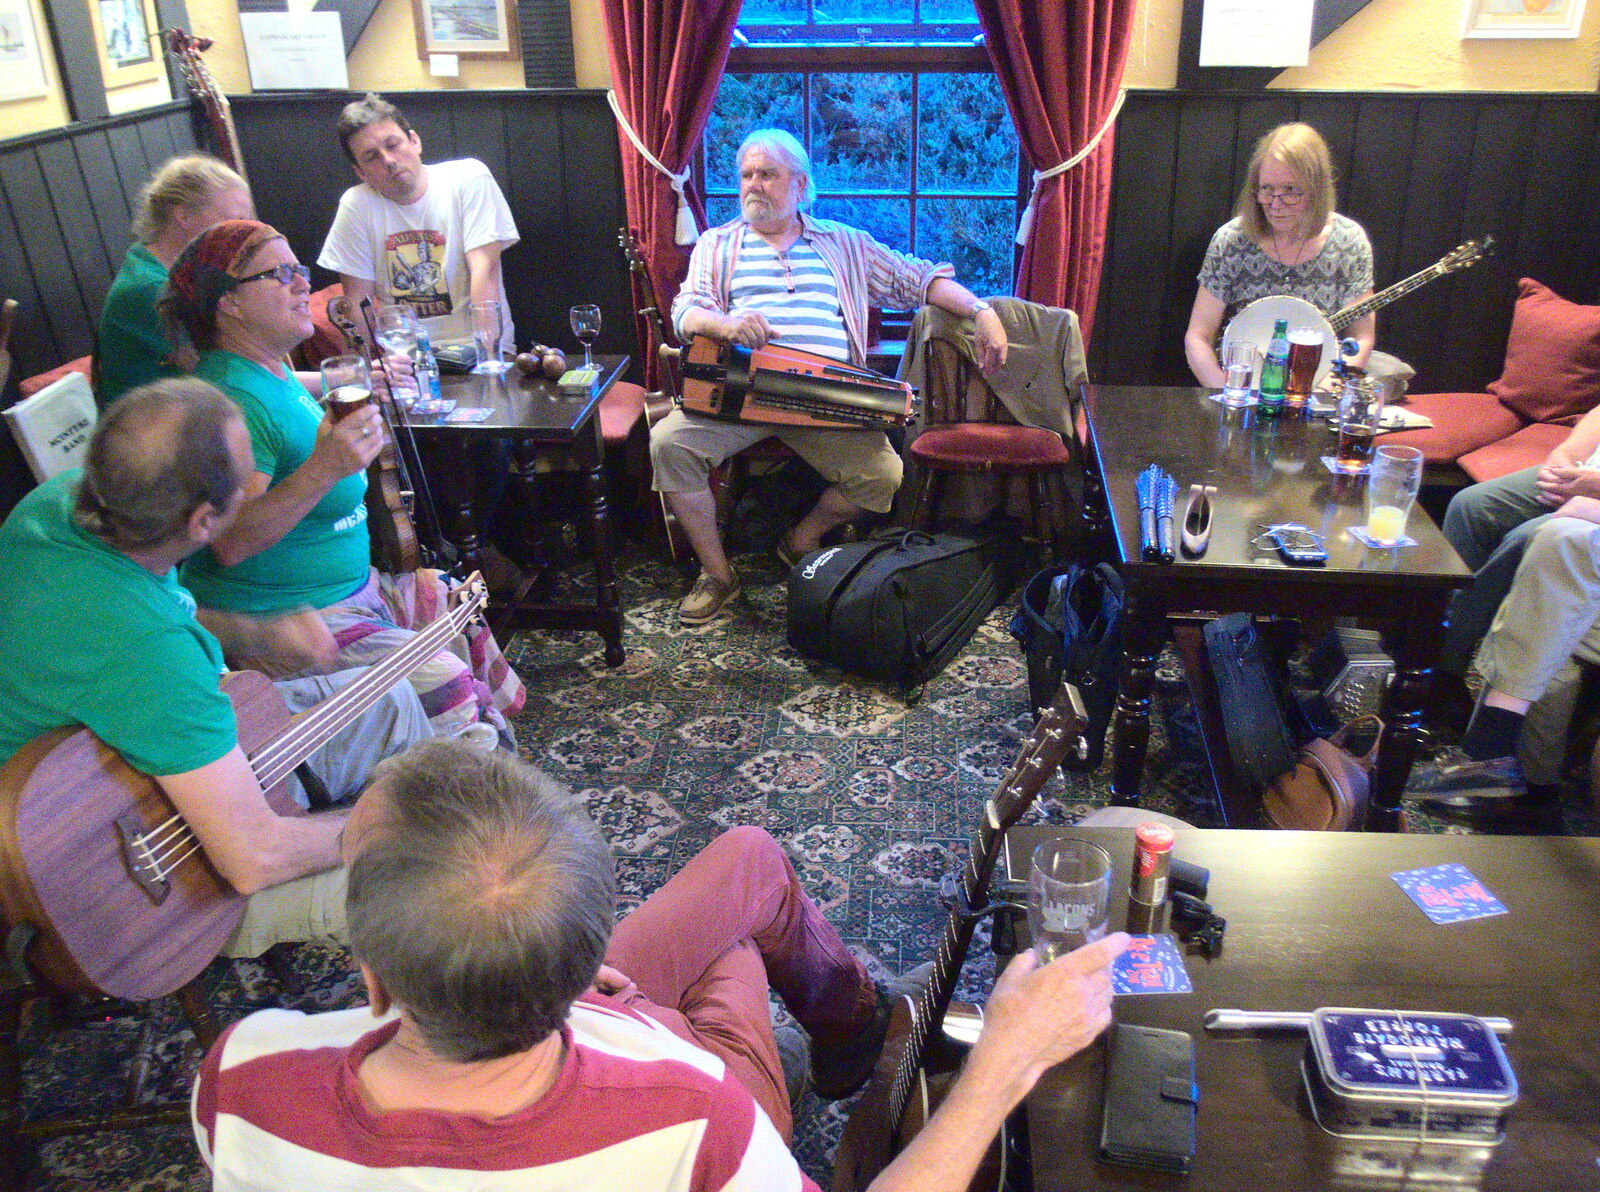 The BSCC at The Crown and Hot Summer Days, Diss, Pulham and London - 24th July 2018: It's folk night in the Tree